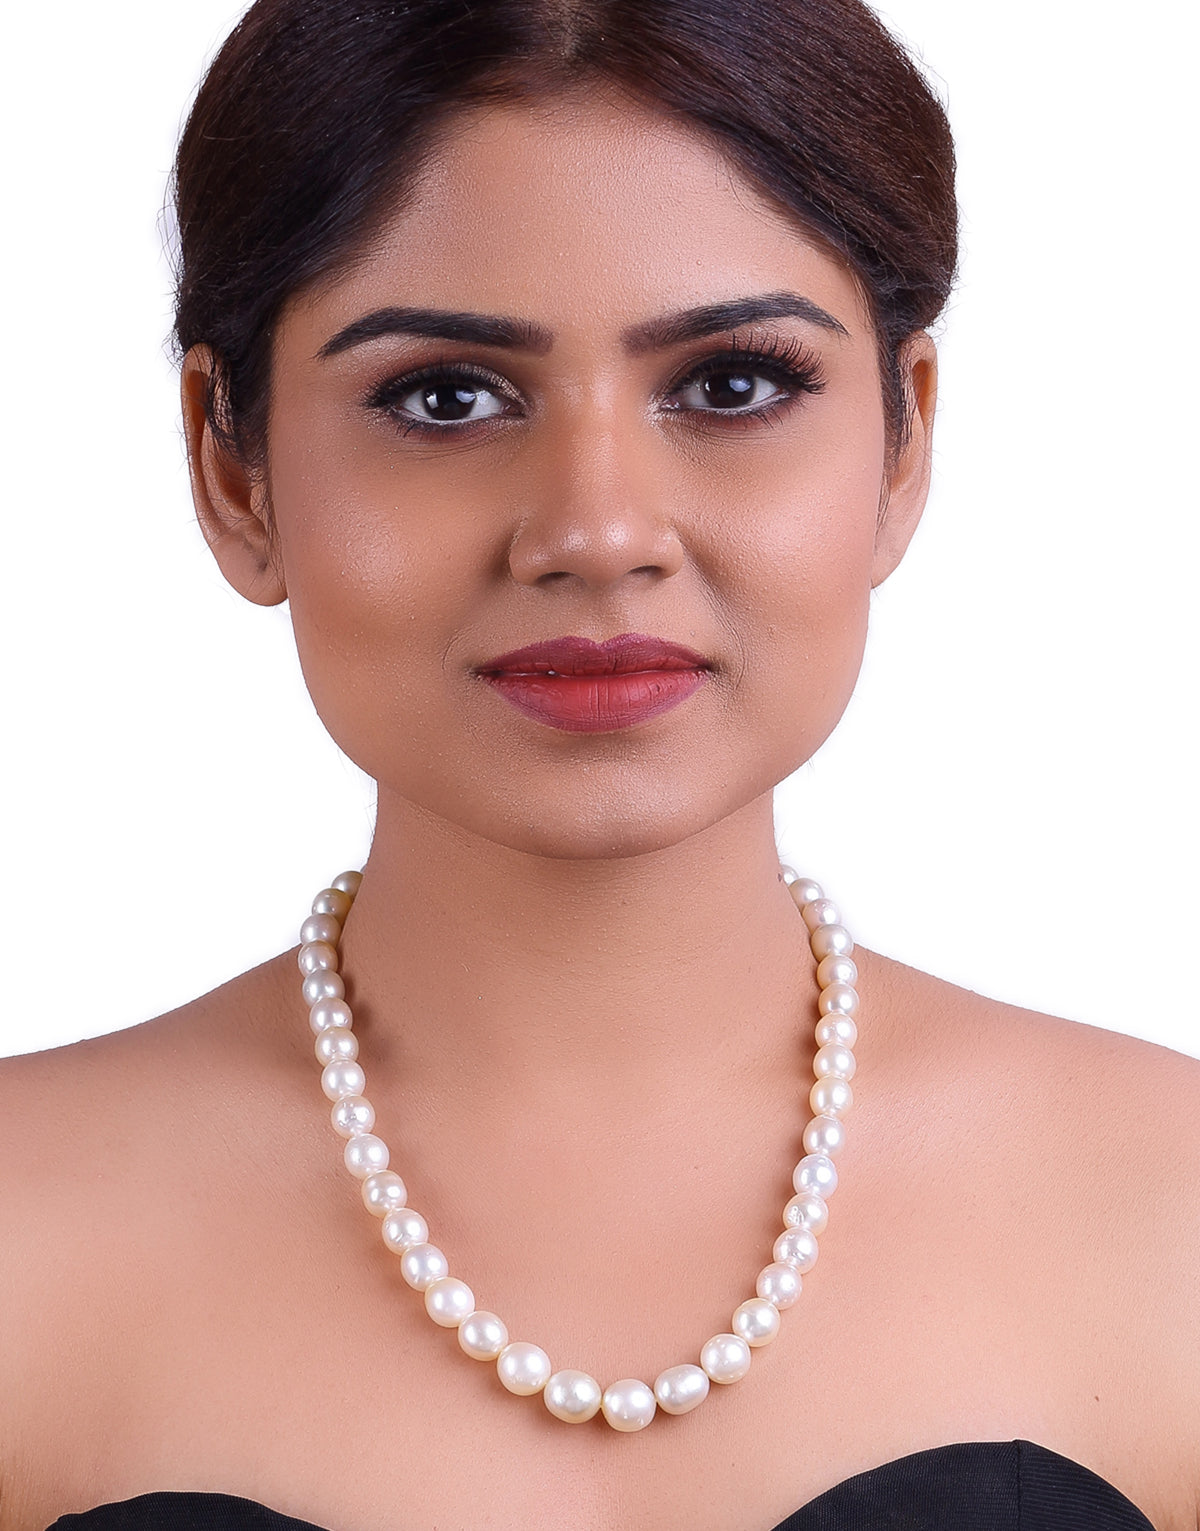 Cream Saltwater South Sea Drop Pearls Necklace, 9-11.8mm –A Quality